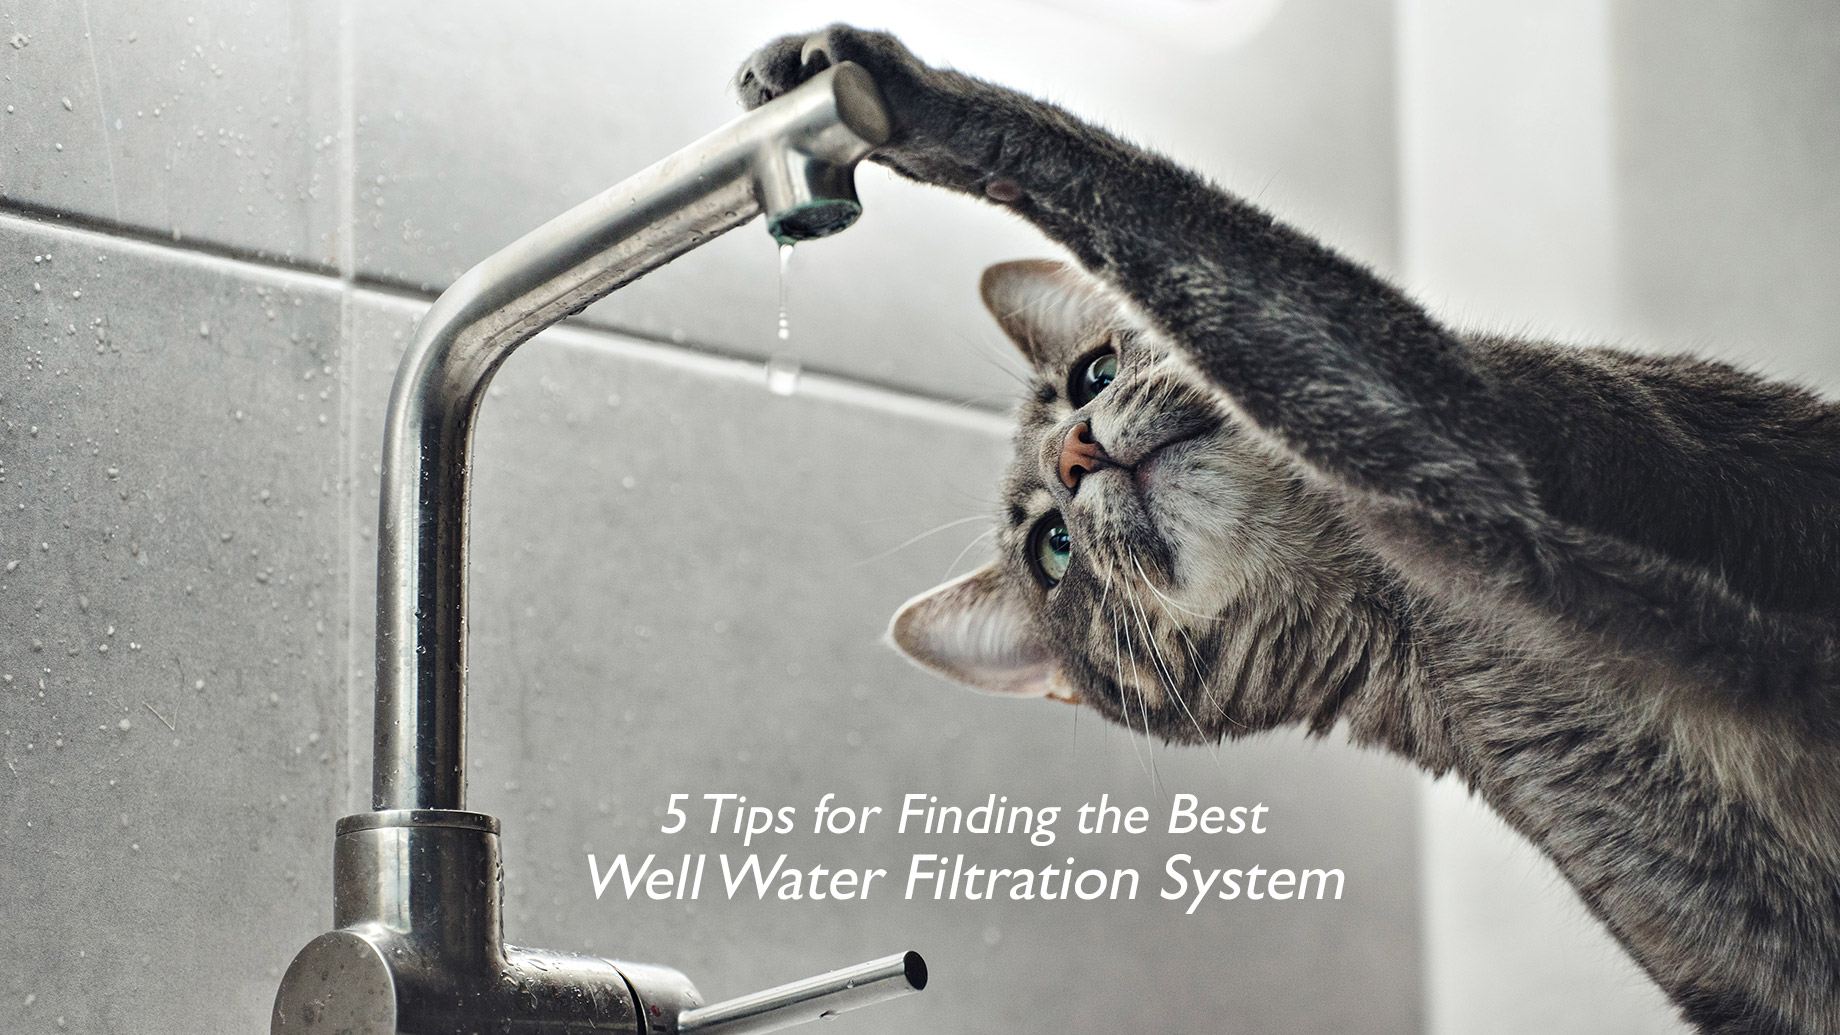 5 Tips for Finding the Best Well Water Filtration System